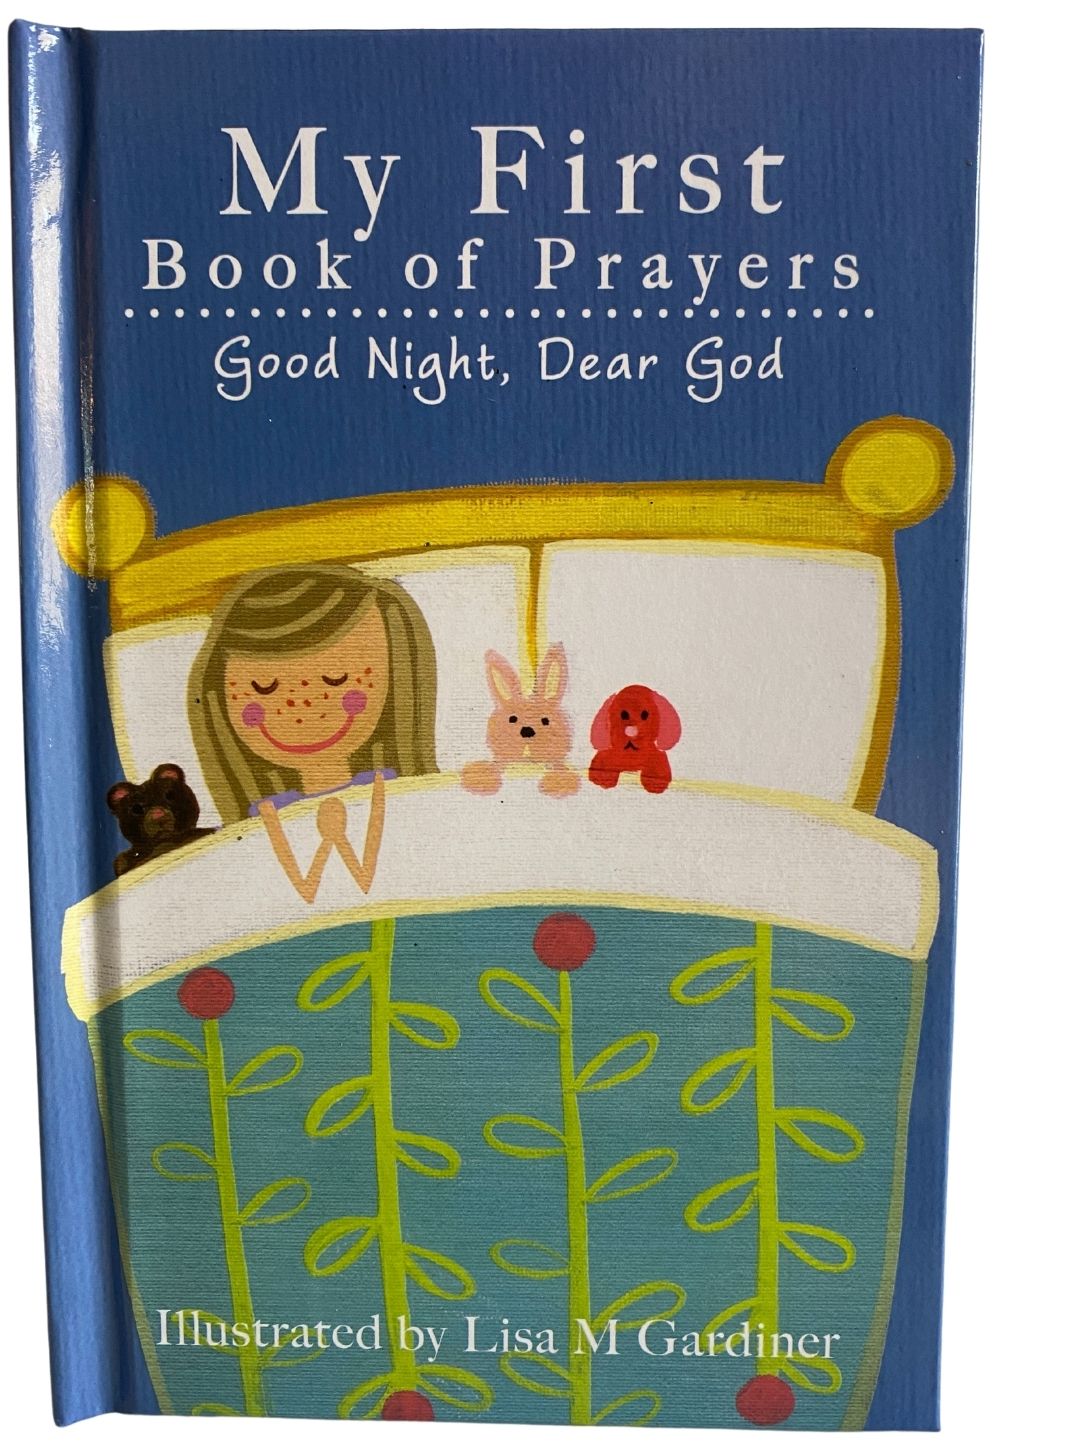 My First Book Of Prayers Set Of 4 Hearty Household